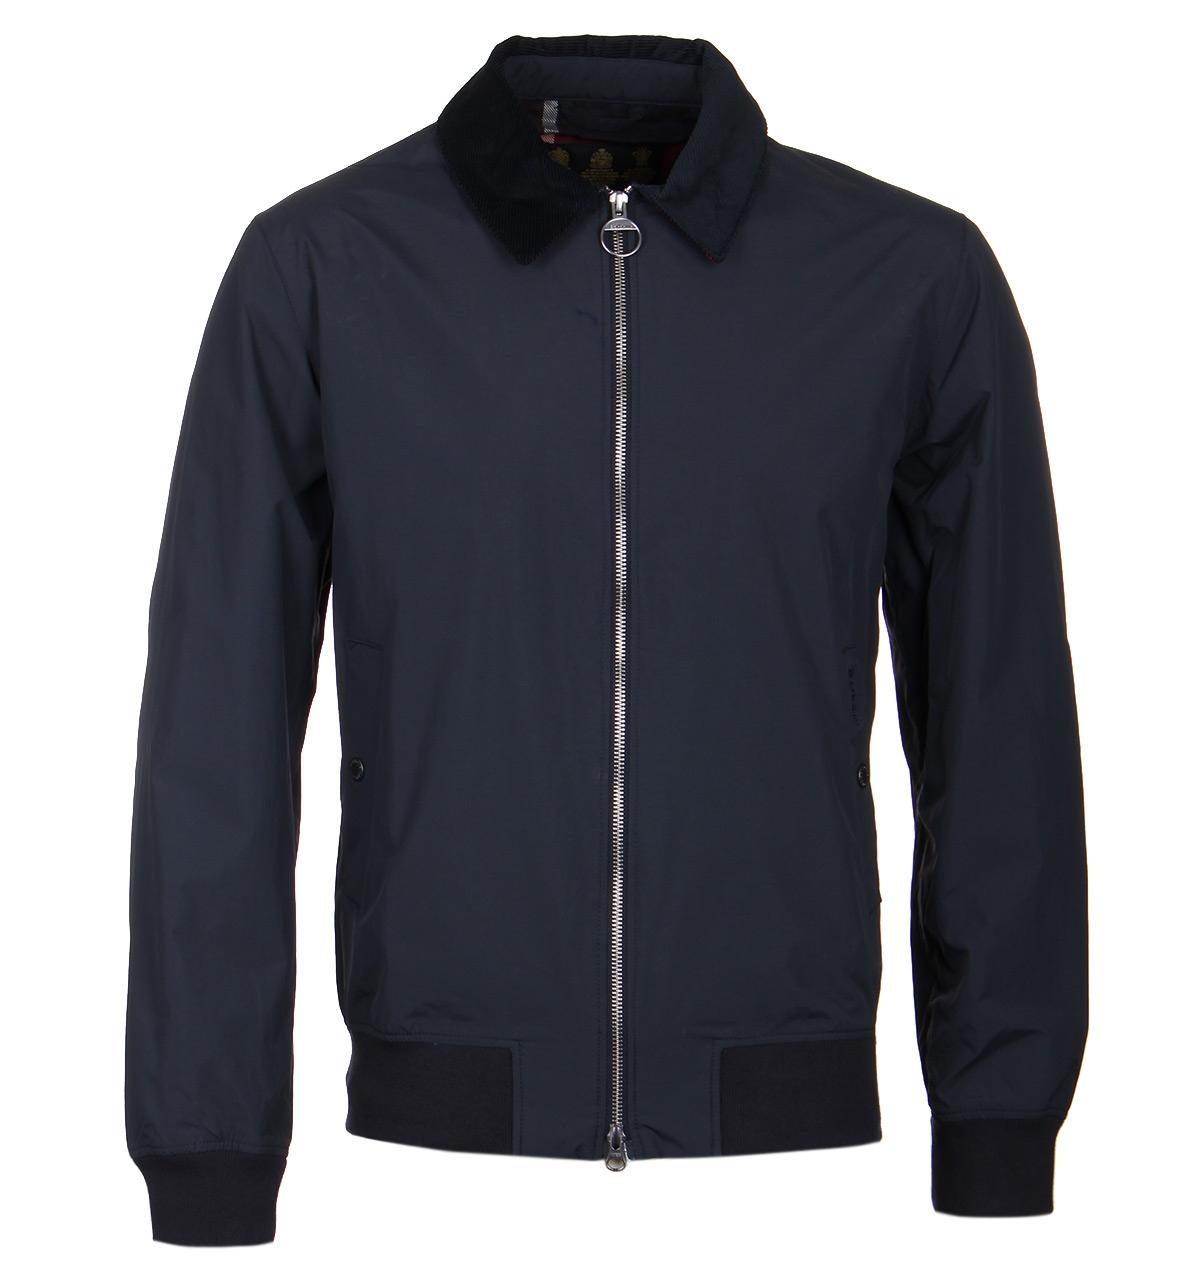 Barbour Corpach Jacket on Sale, 54% OFF | www.ipecal.edu.mx